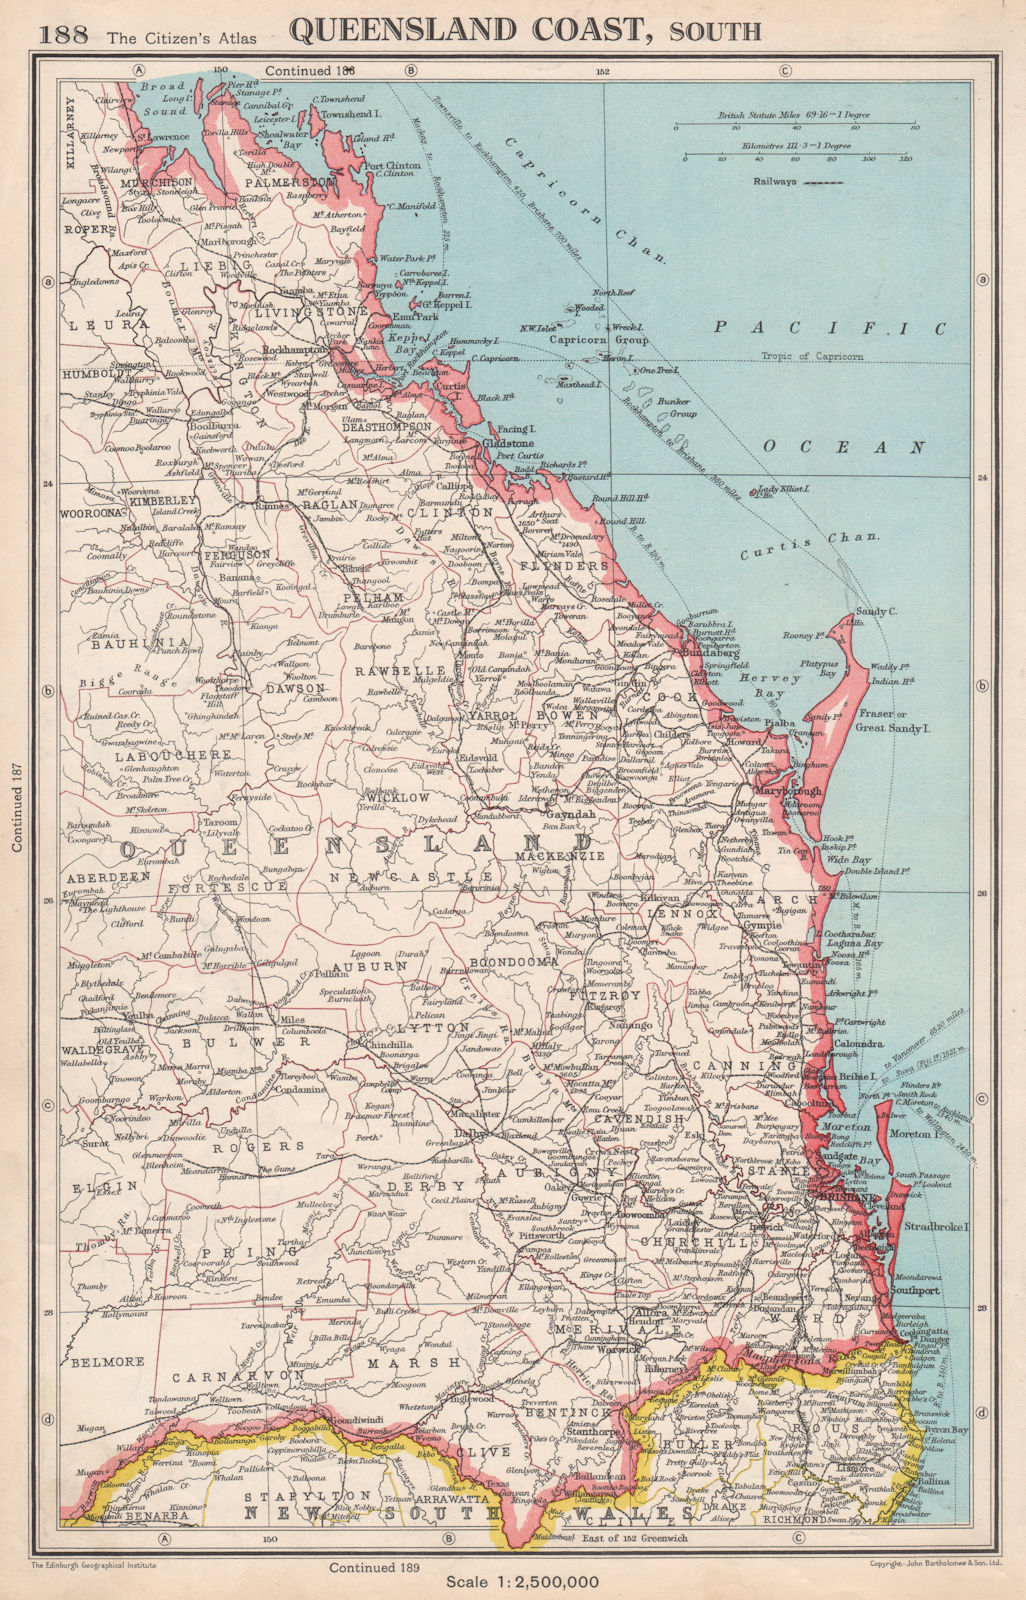 Associate Product QUEENSLAND COAST, SOUTH. showing counties. BARTHOLOMEW 1952 old vintage map